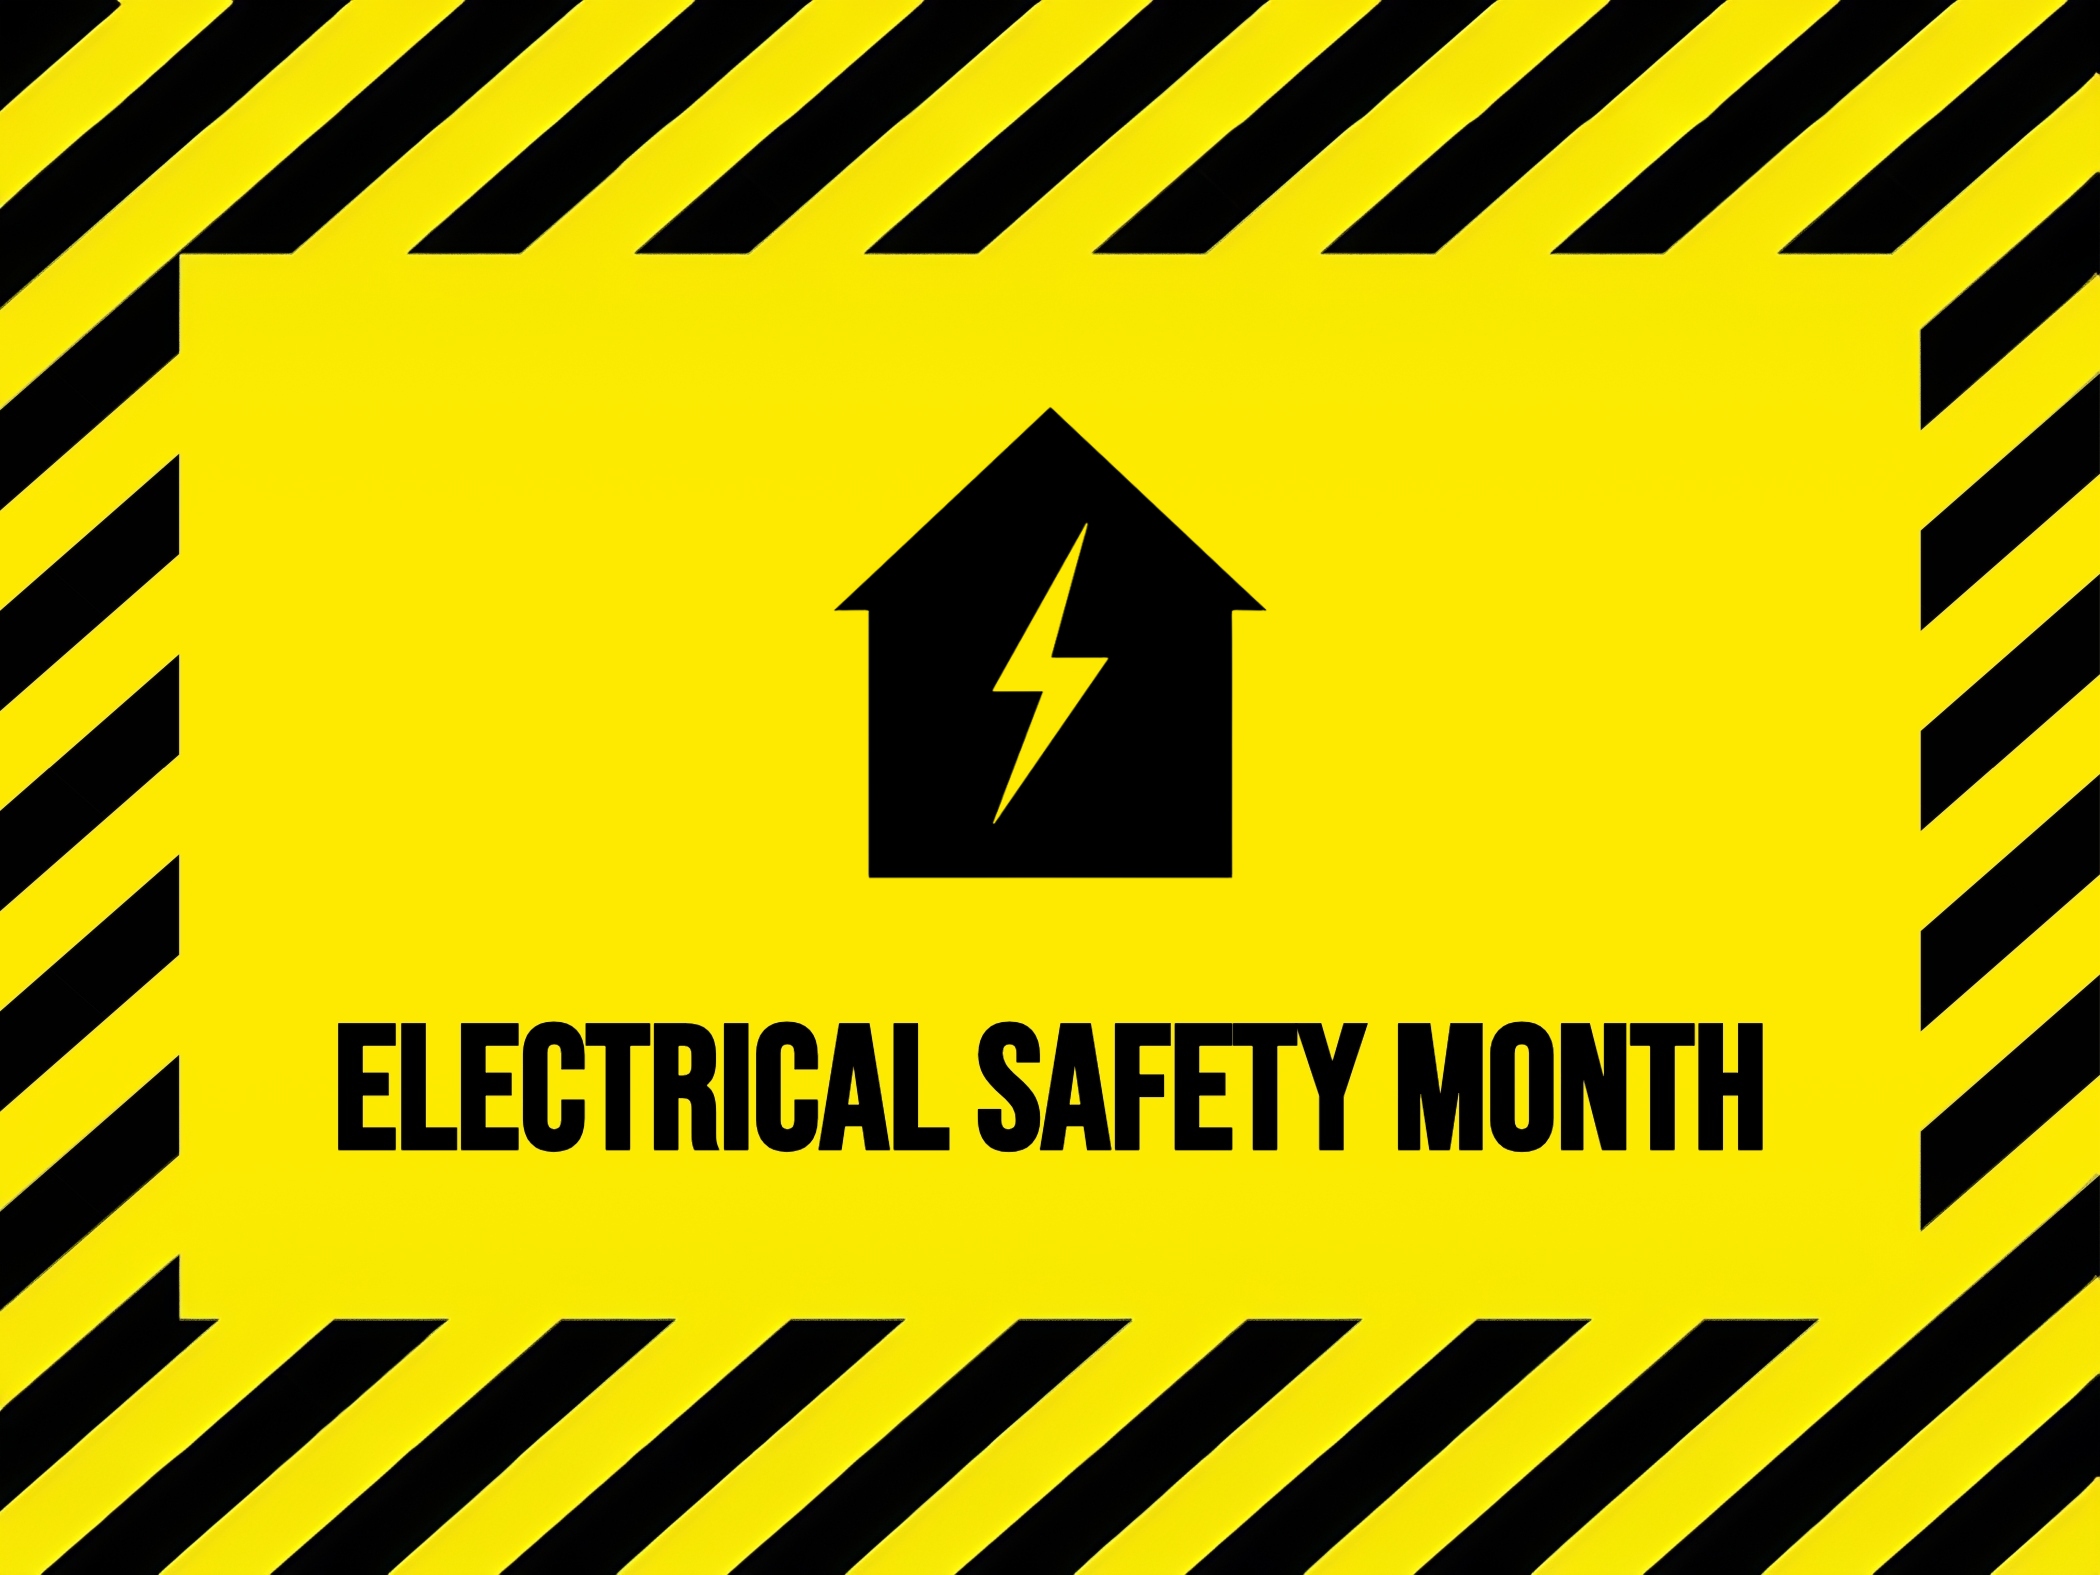 Electrical safety month